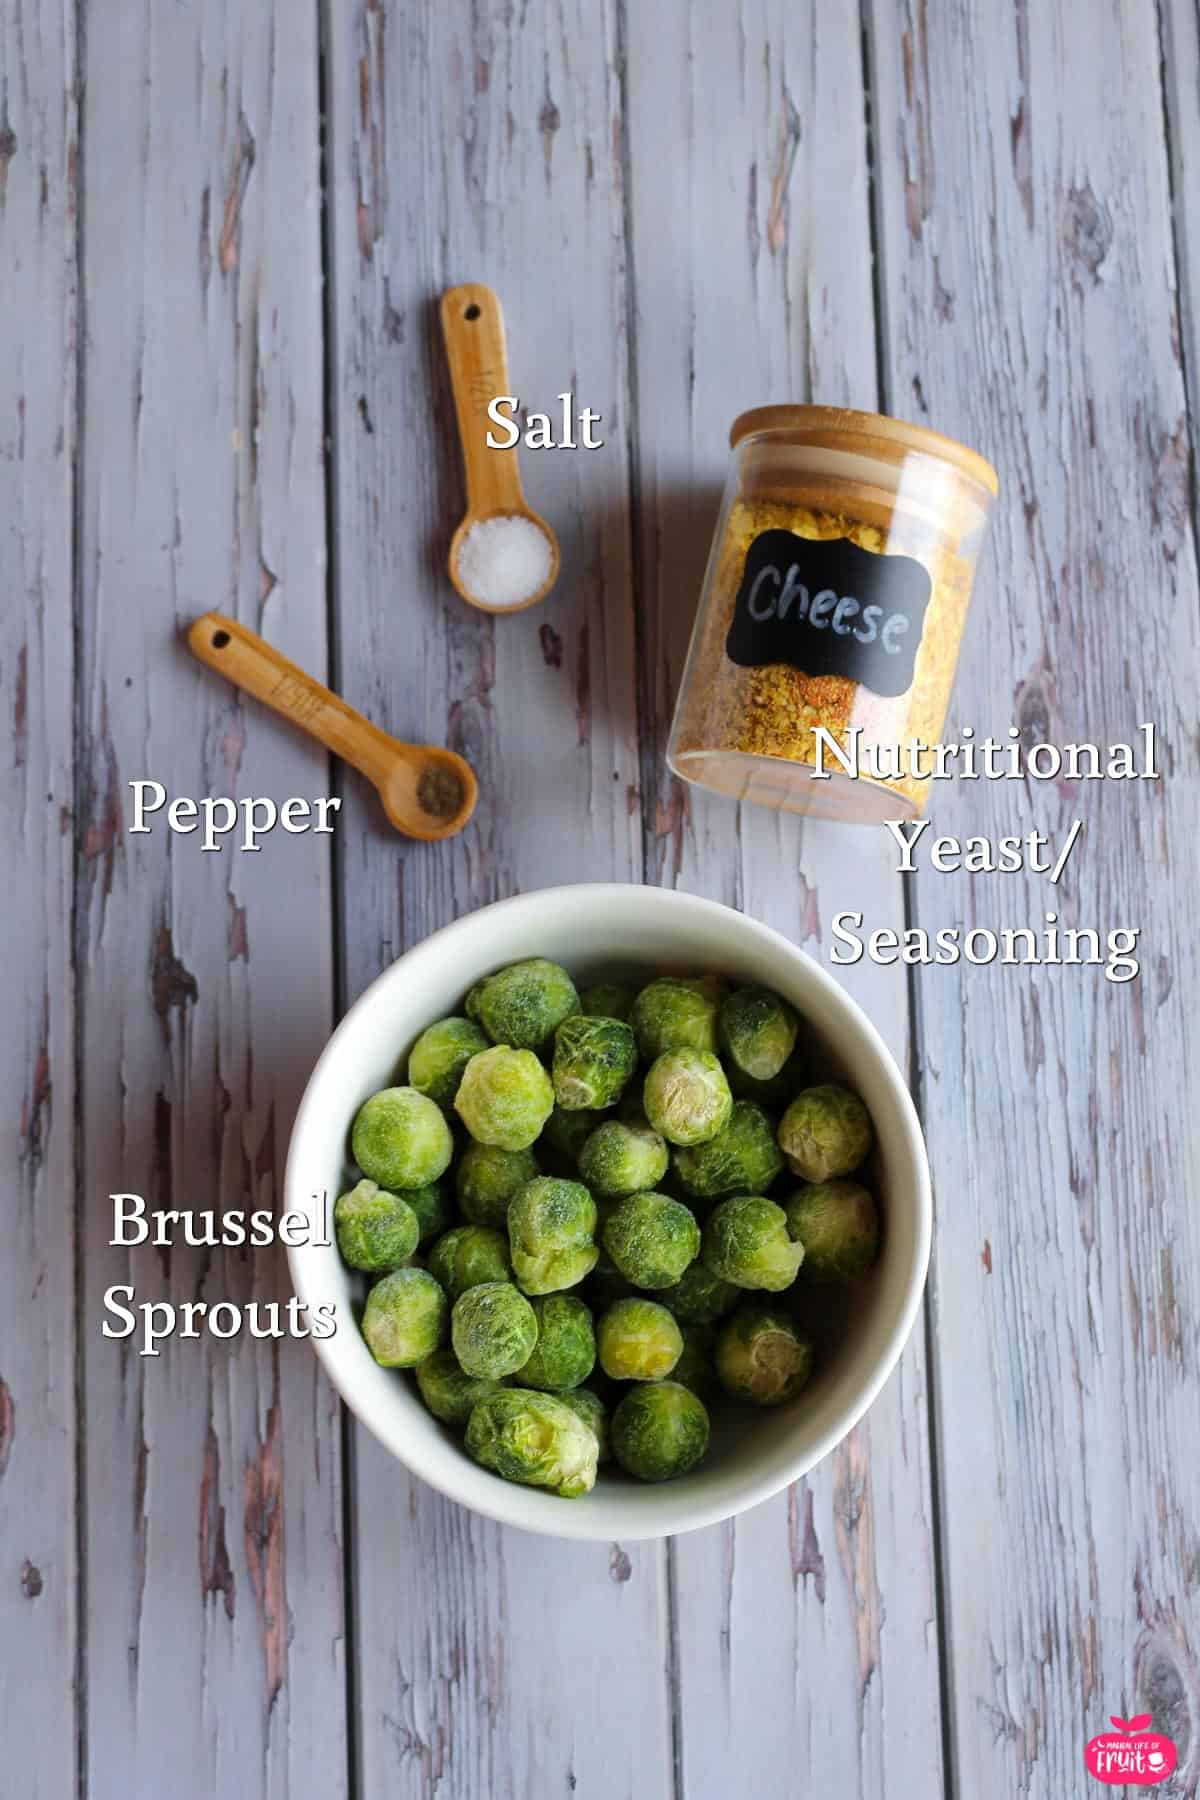 Ingredients for Crispy Smashed Brussels Sprouts, brussels sprouts, vegan cheese seasoning, salt and pepper.